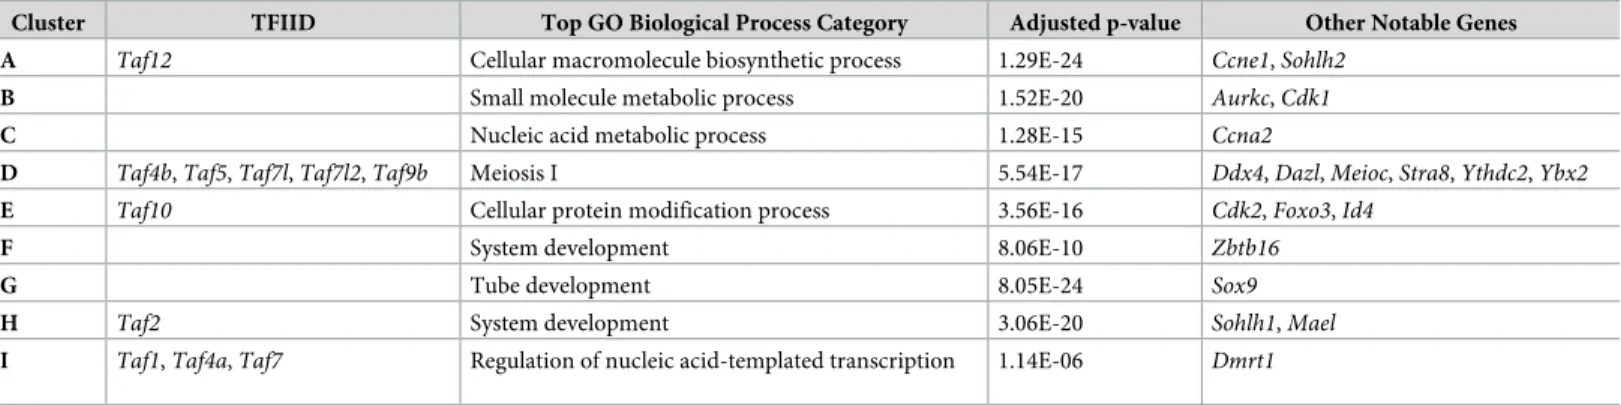 Table 1. Top gene ontology category in each cluster, TFIID component found in each, and other notable genes found in cluster.